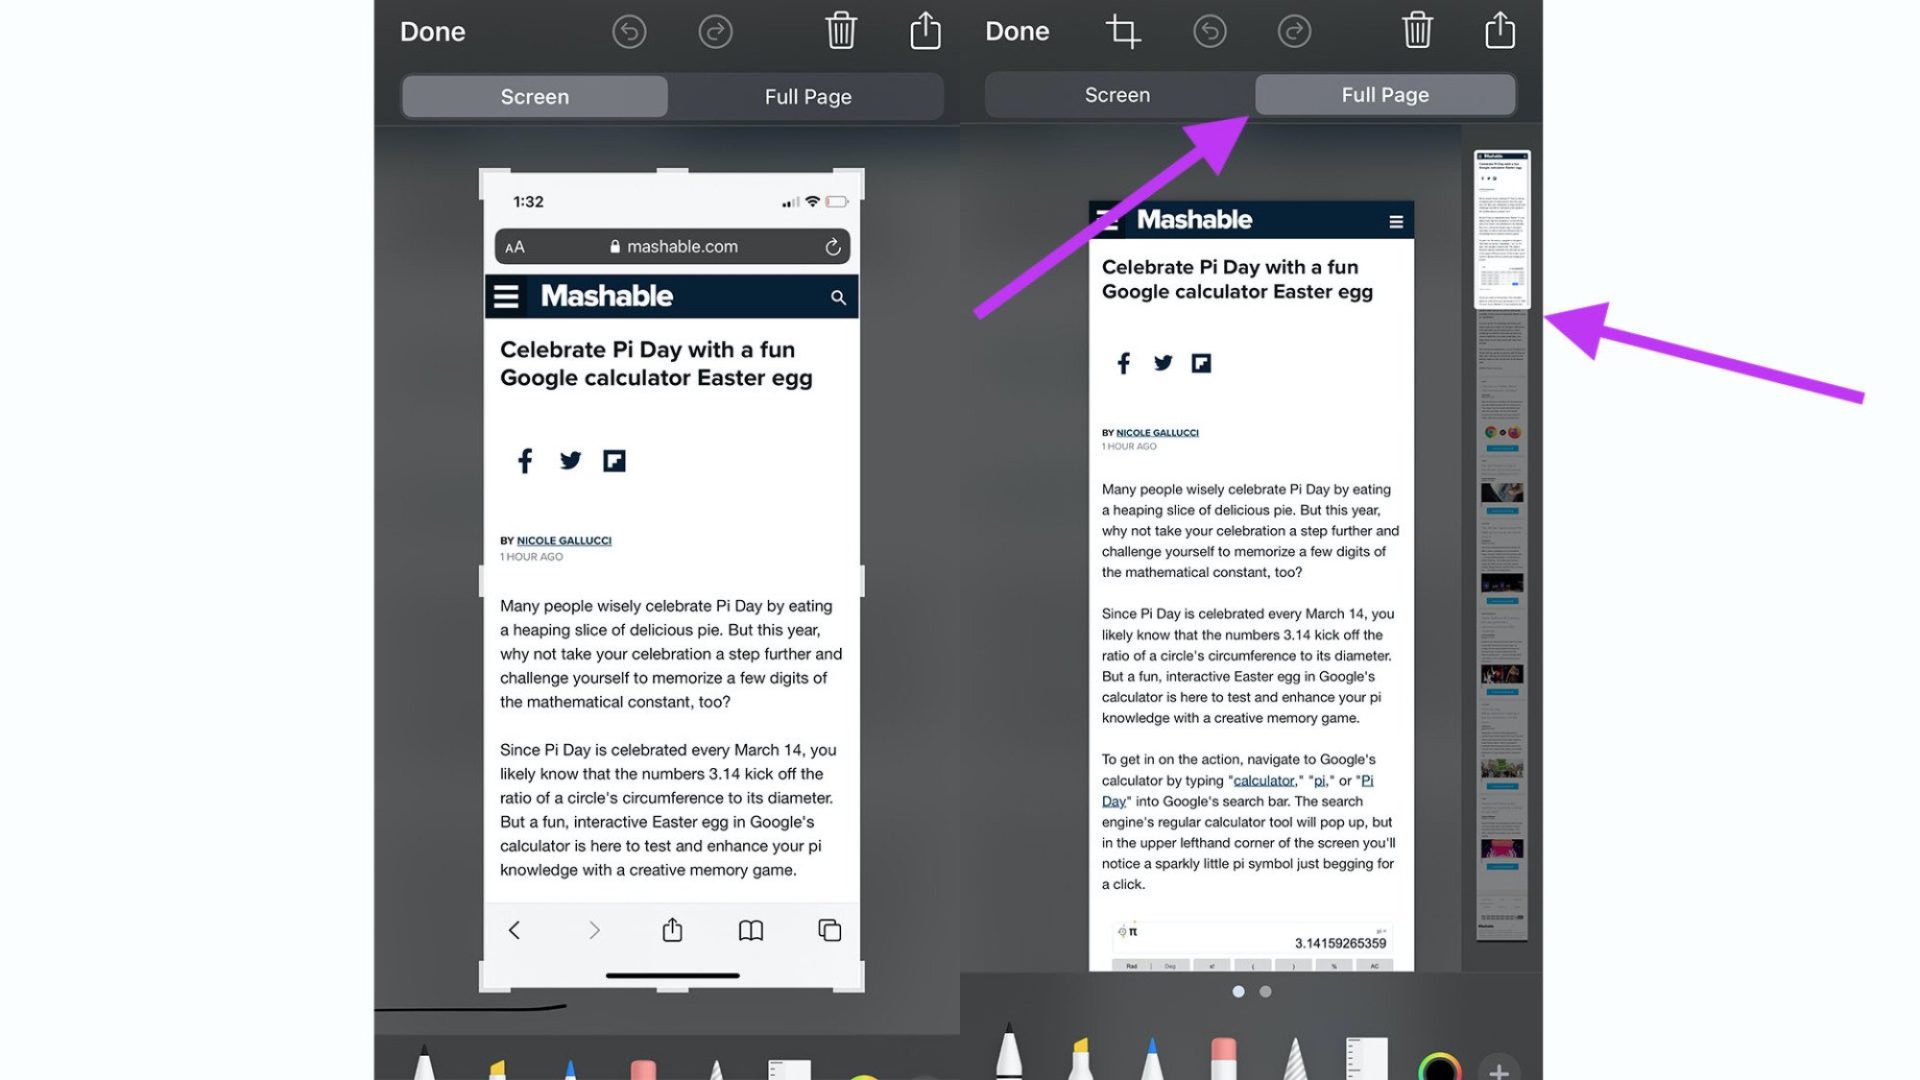 How to Capture an Entire Web Page on iPhone